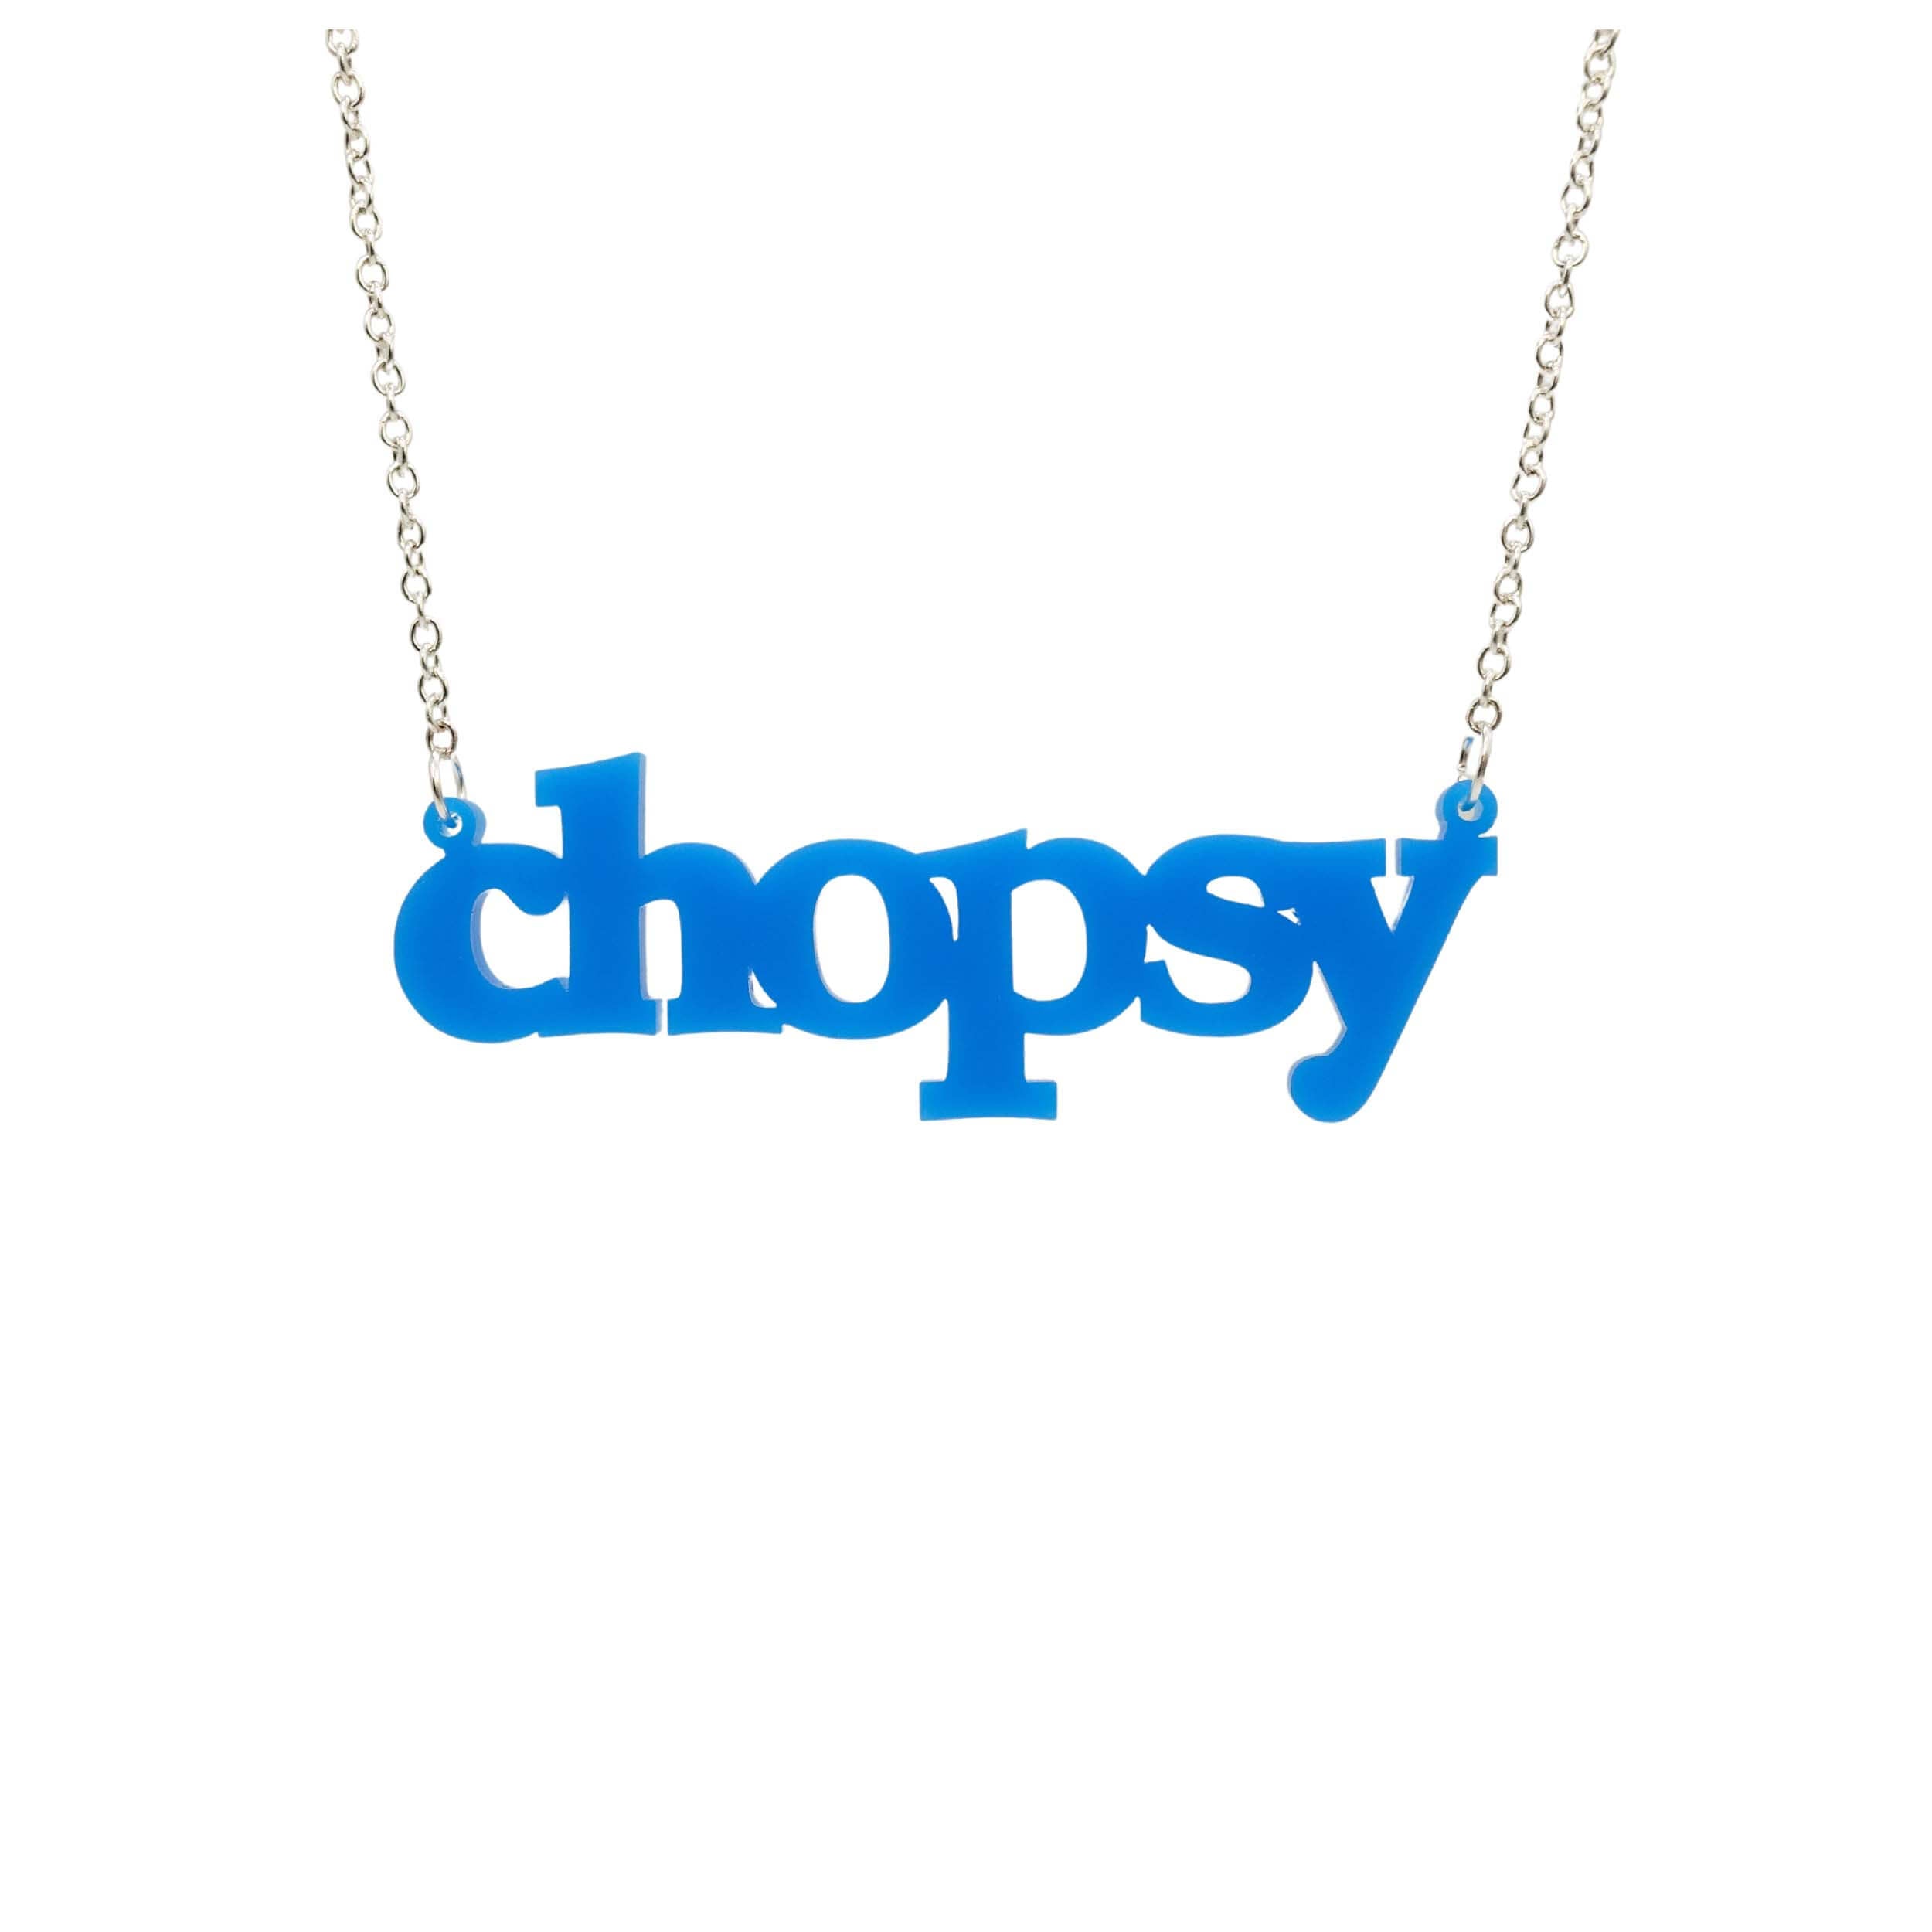 Bright blue Chopsy necklace shown hanging against a white backround.  